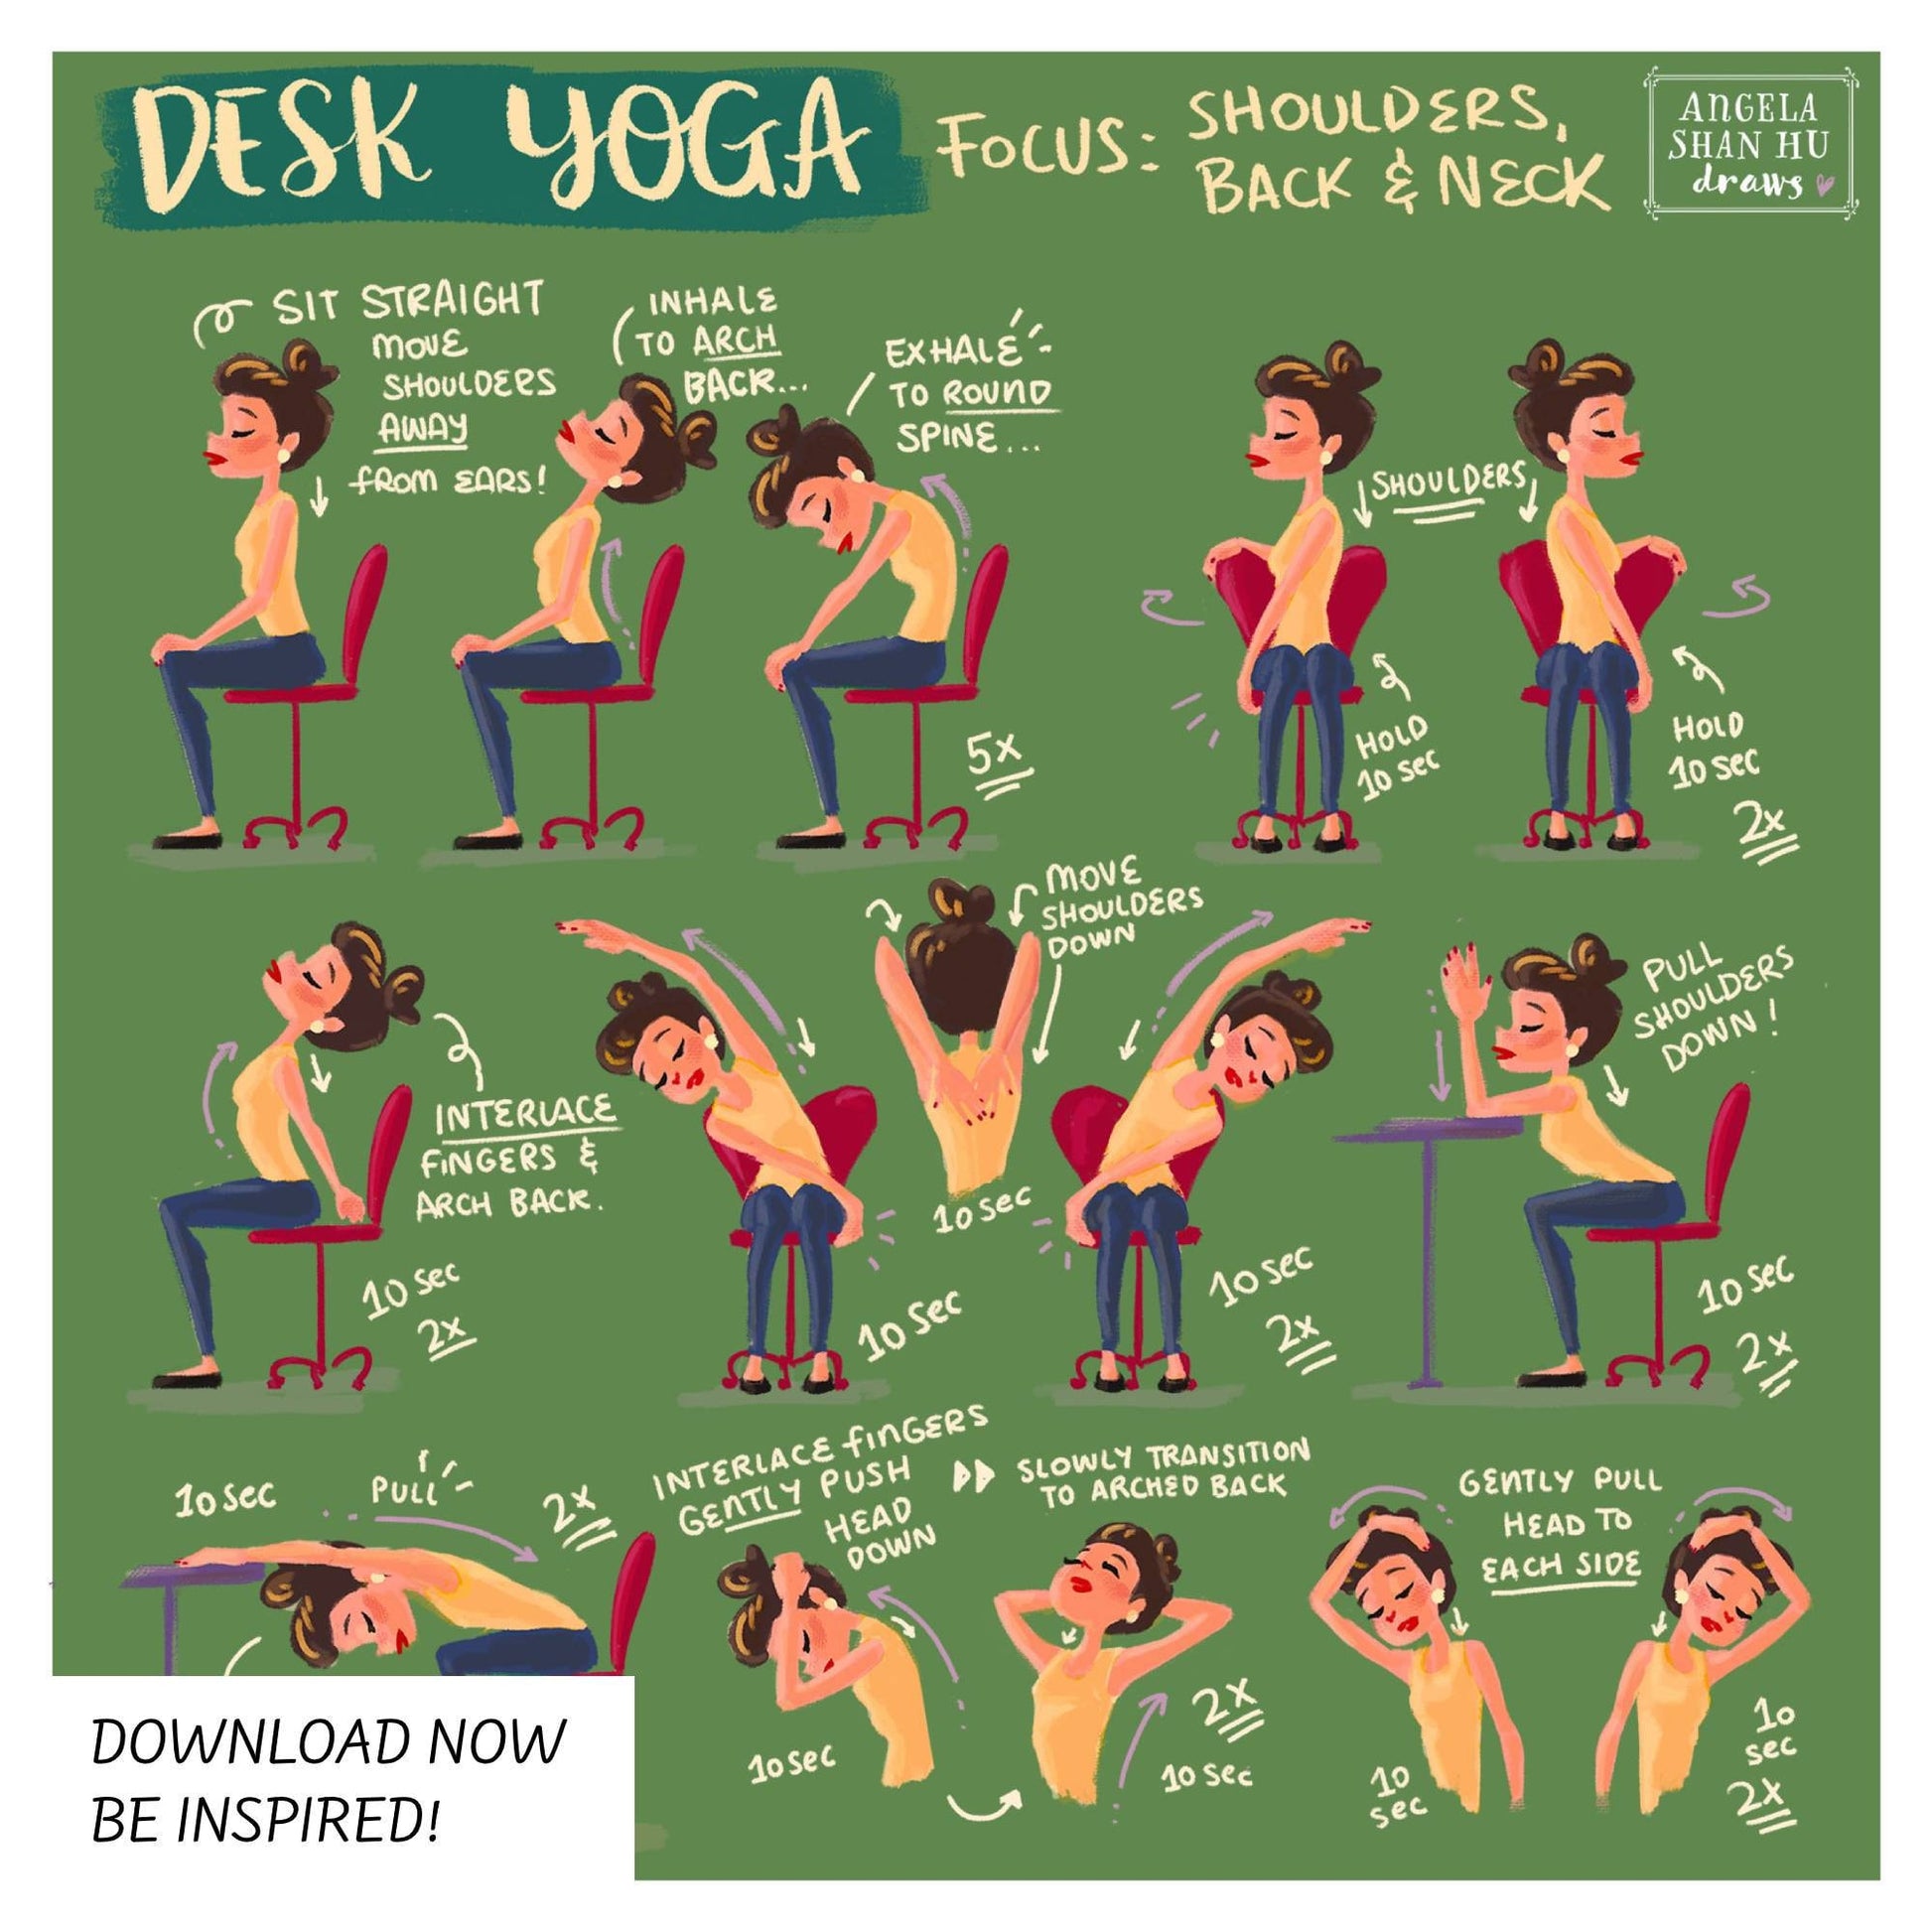 Desk Yoga Focus on Shoulders, Back, and Neck Physical Print Chair